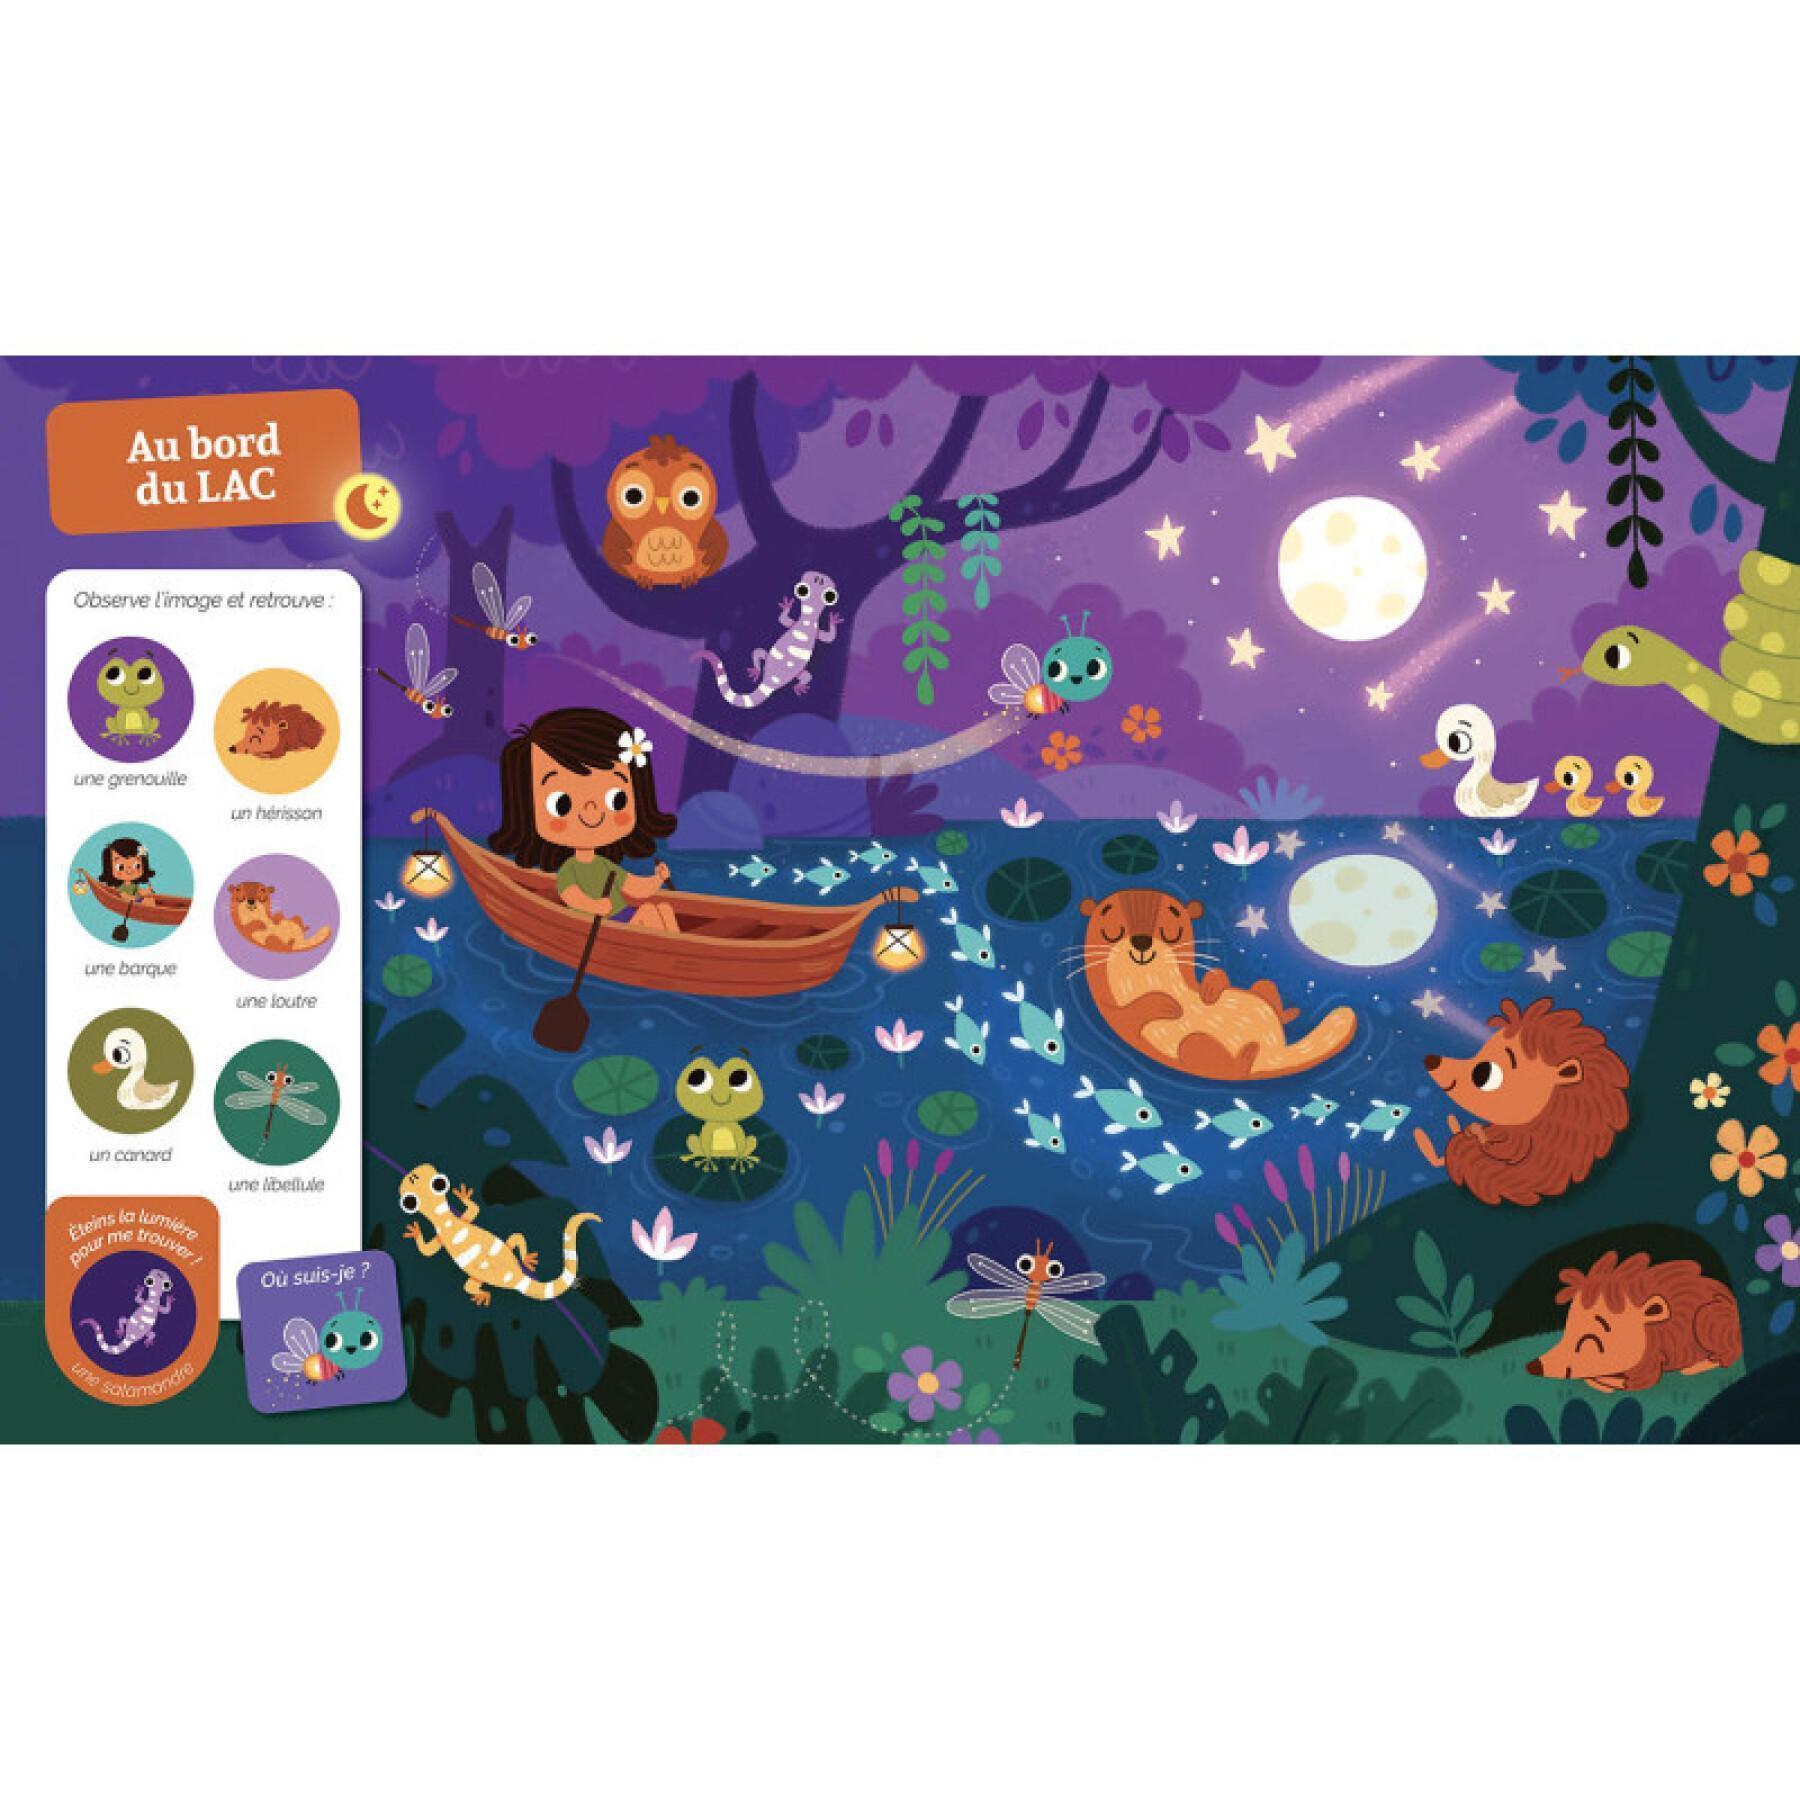 Glow-in-the-dark search-and-find book for toddlers Auzou